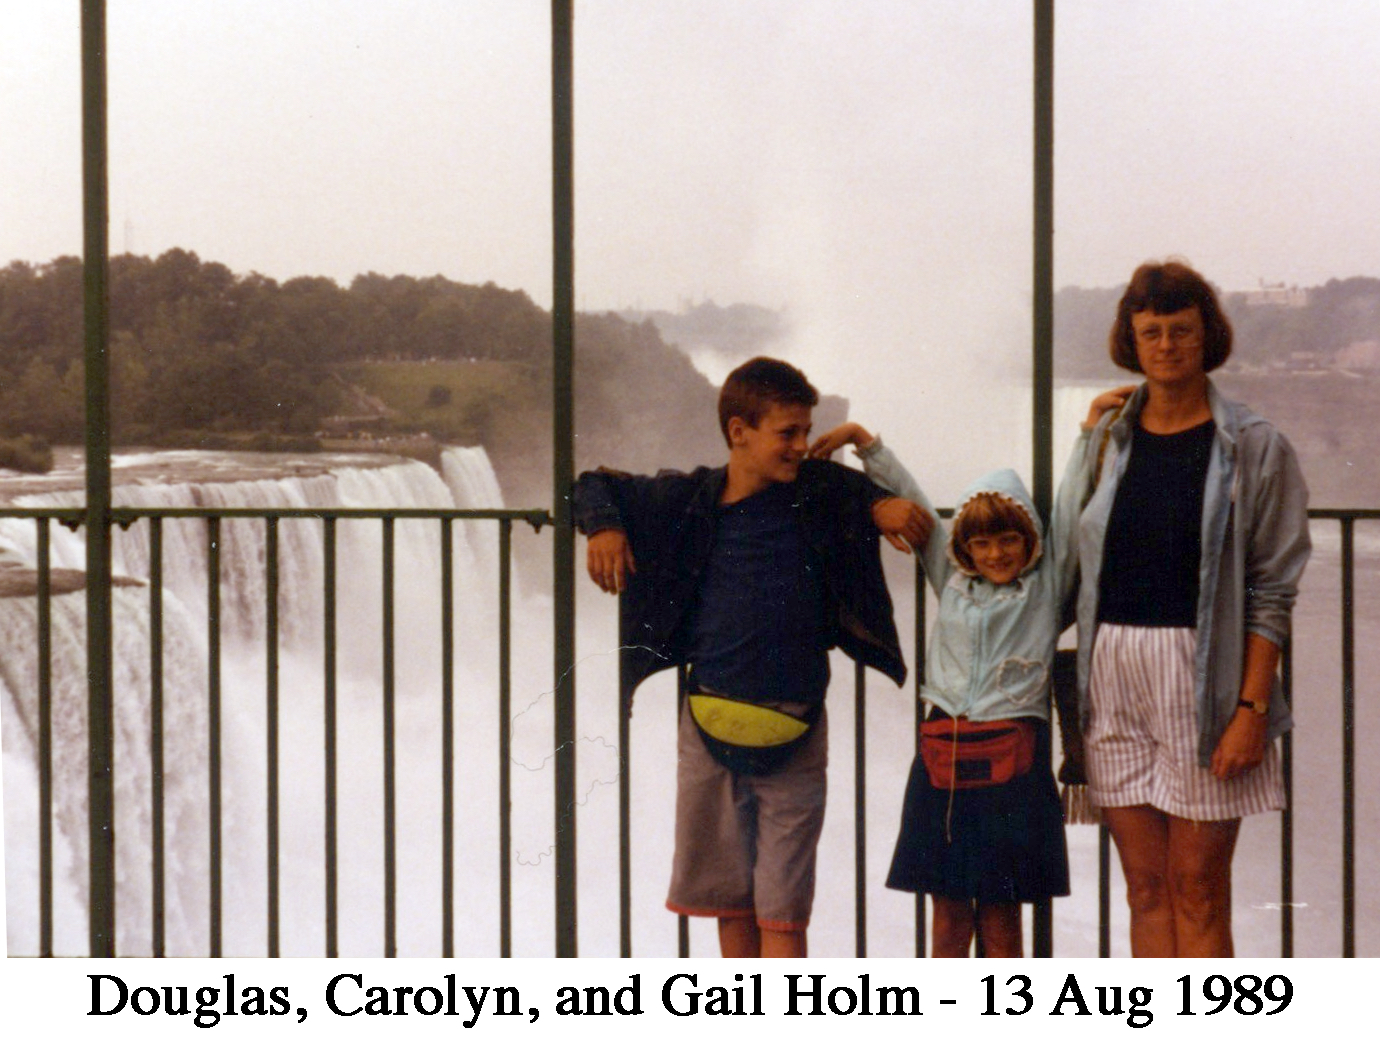 Douglas, Carolyn, and Gail standing by the railing with the falls in the background